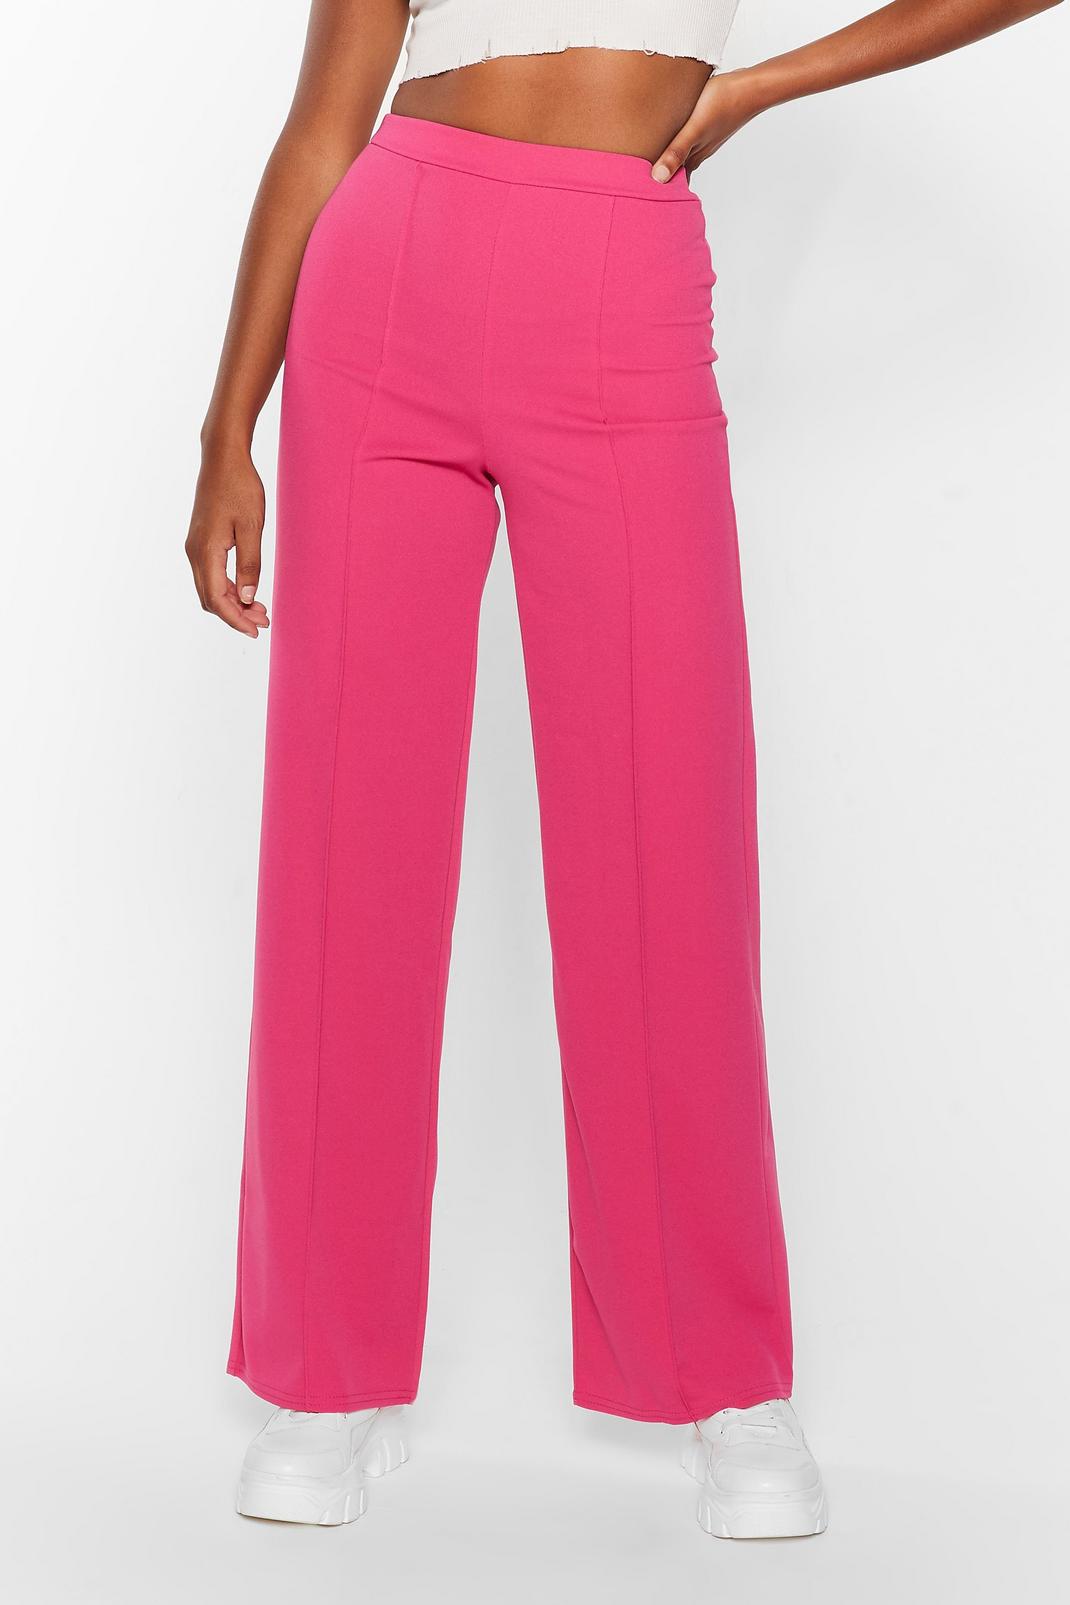 Hot pink Seam You Lookin' High-Waisted Wide-Leg Trousers image number 1